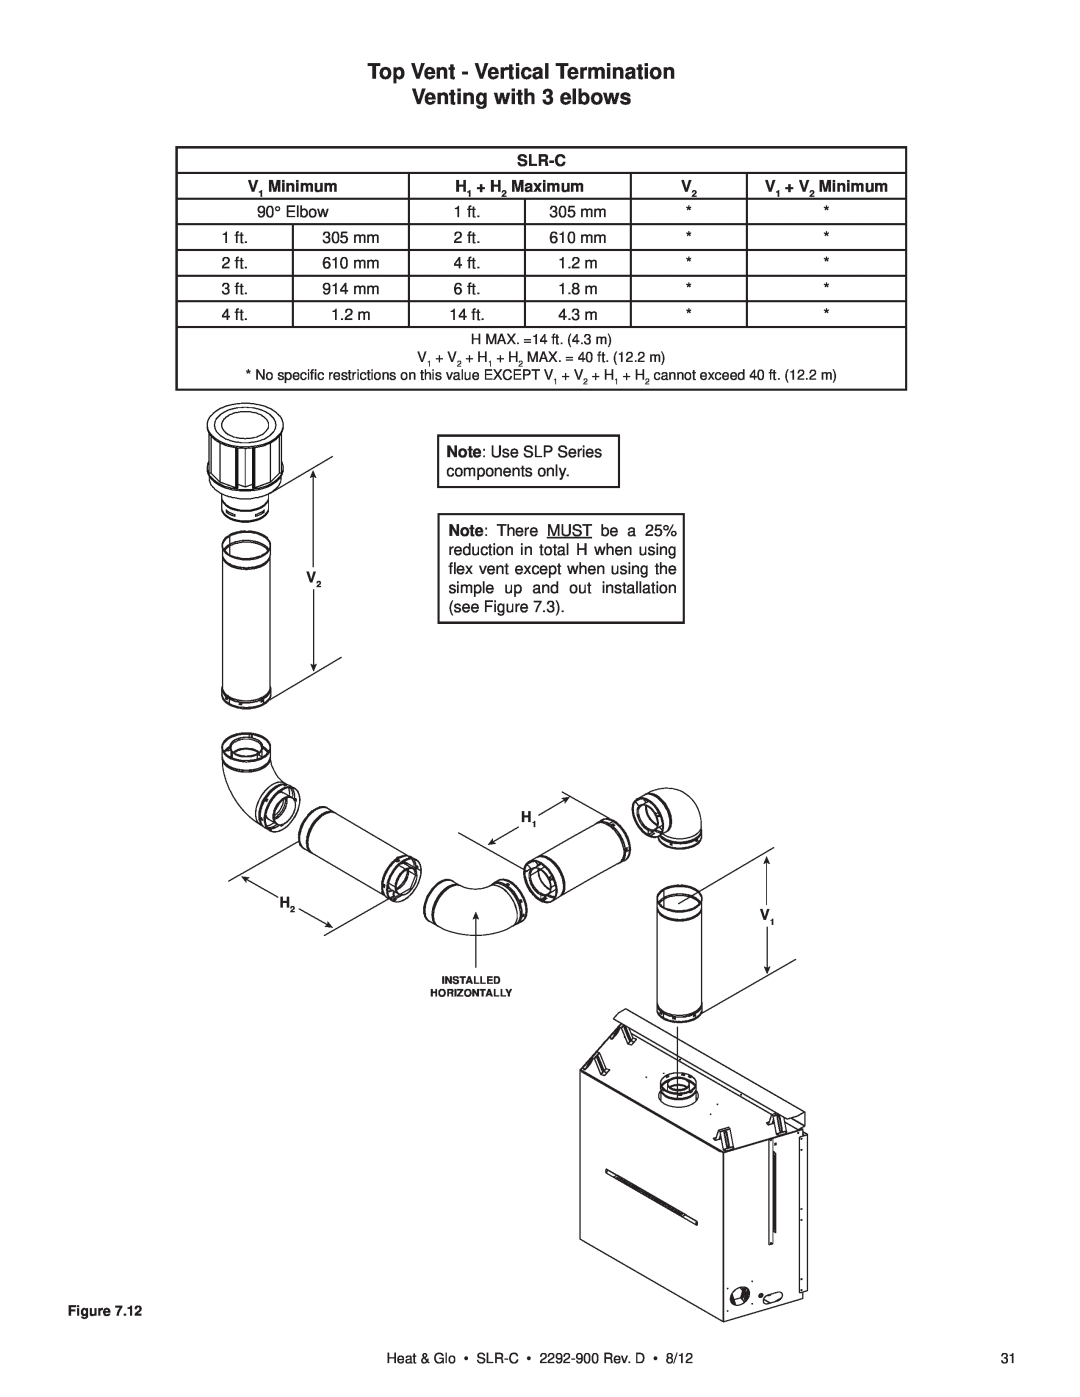 Heat & Glo LifeStyle SLR-C (COSMO) owner manual Top Vent - Vertical Termination, Venting with 3 elbows, Slr-C, V1 Minimum 